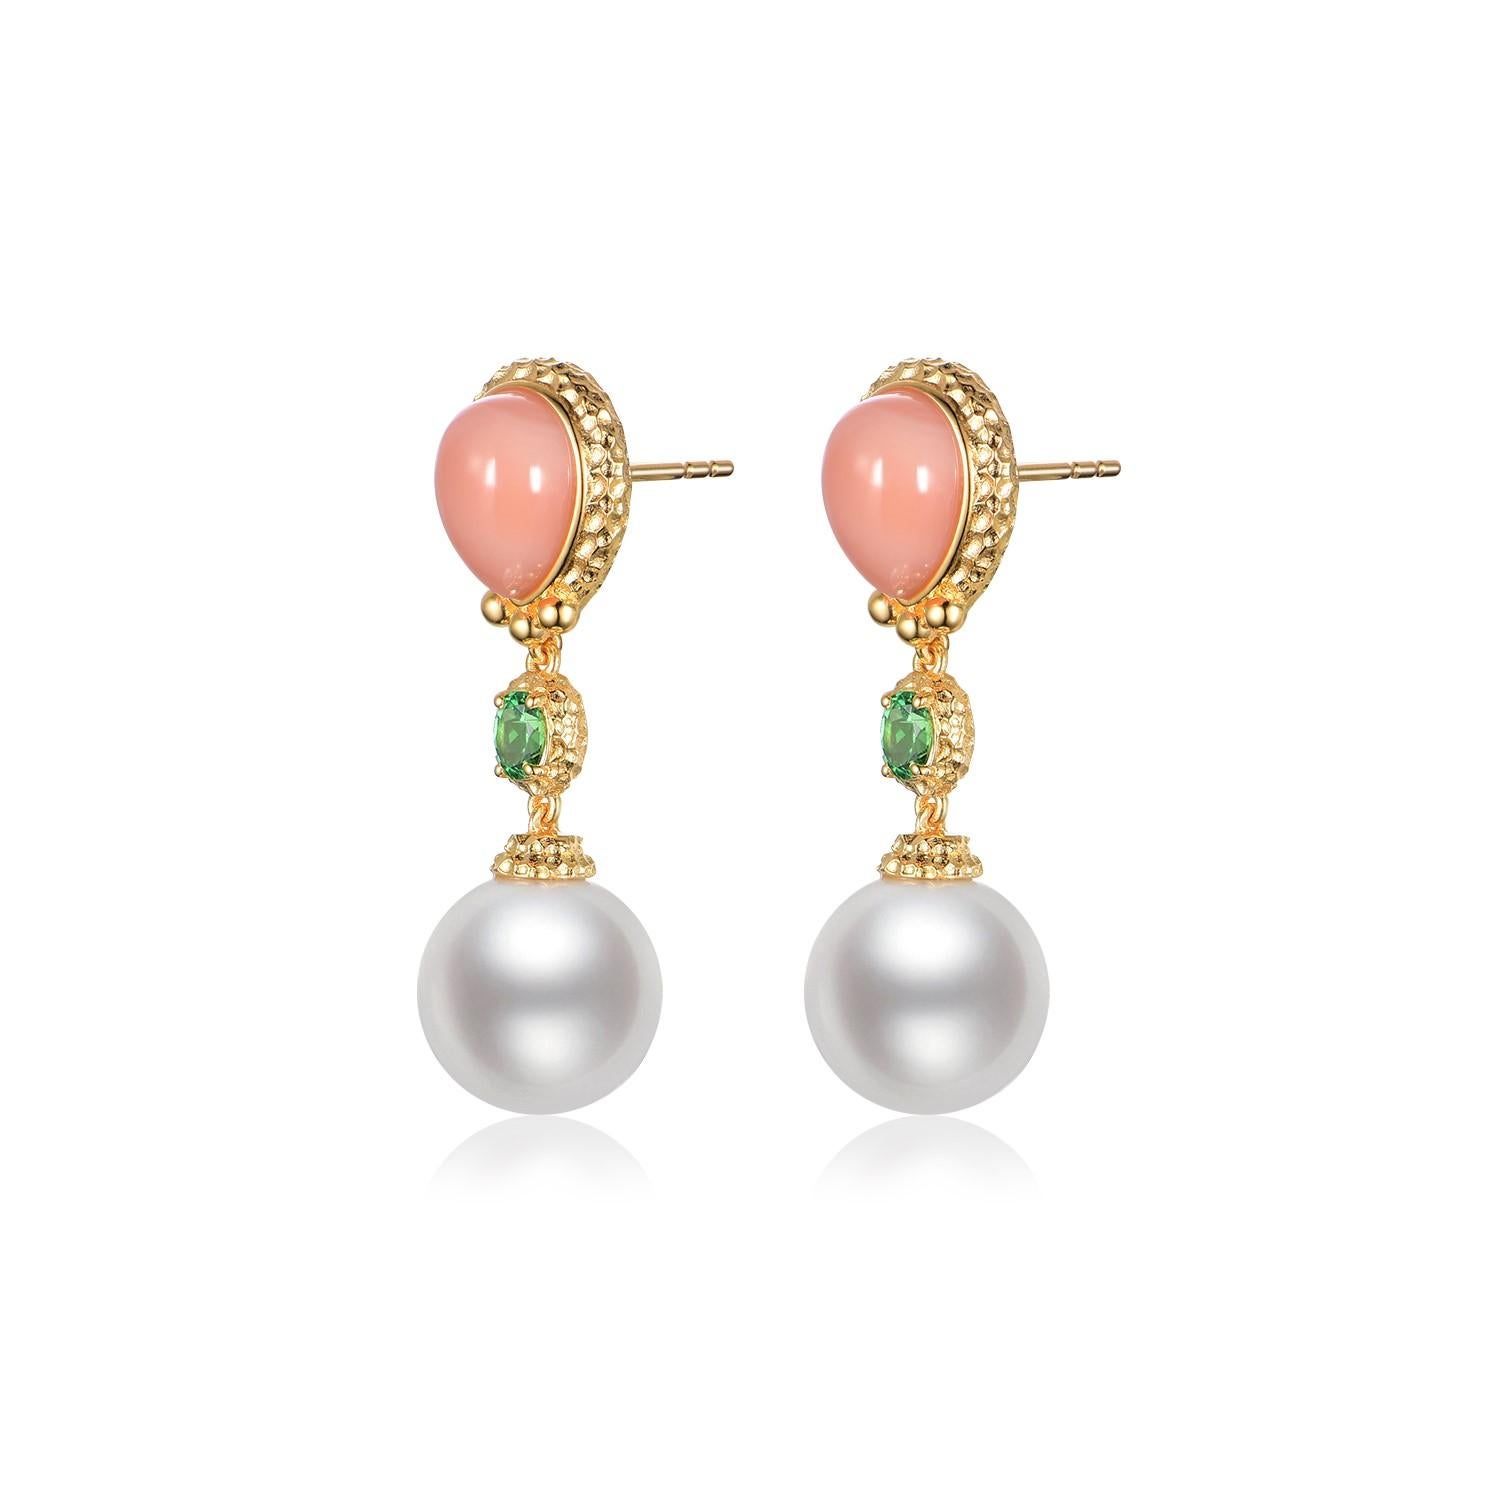 Emanate elegance with these exquisite drop earrings, featuring the natural beauty of South Sea pearls. Crafted with a lustrous 18K gold vermeil over sterling silver, each earring showcases a smooth, pink coral, weighing a total of 4.65 carats, set